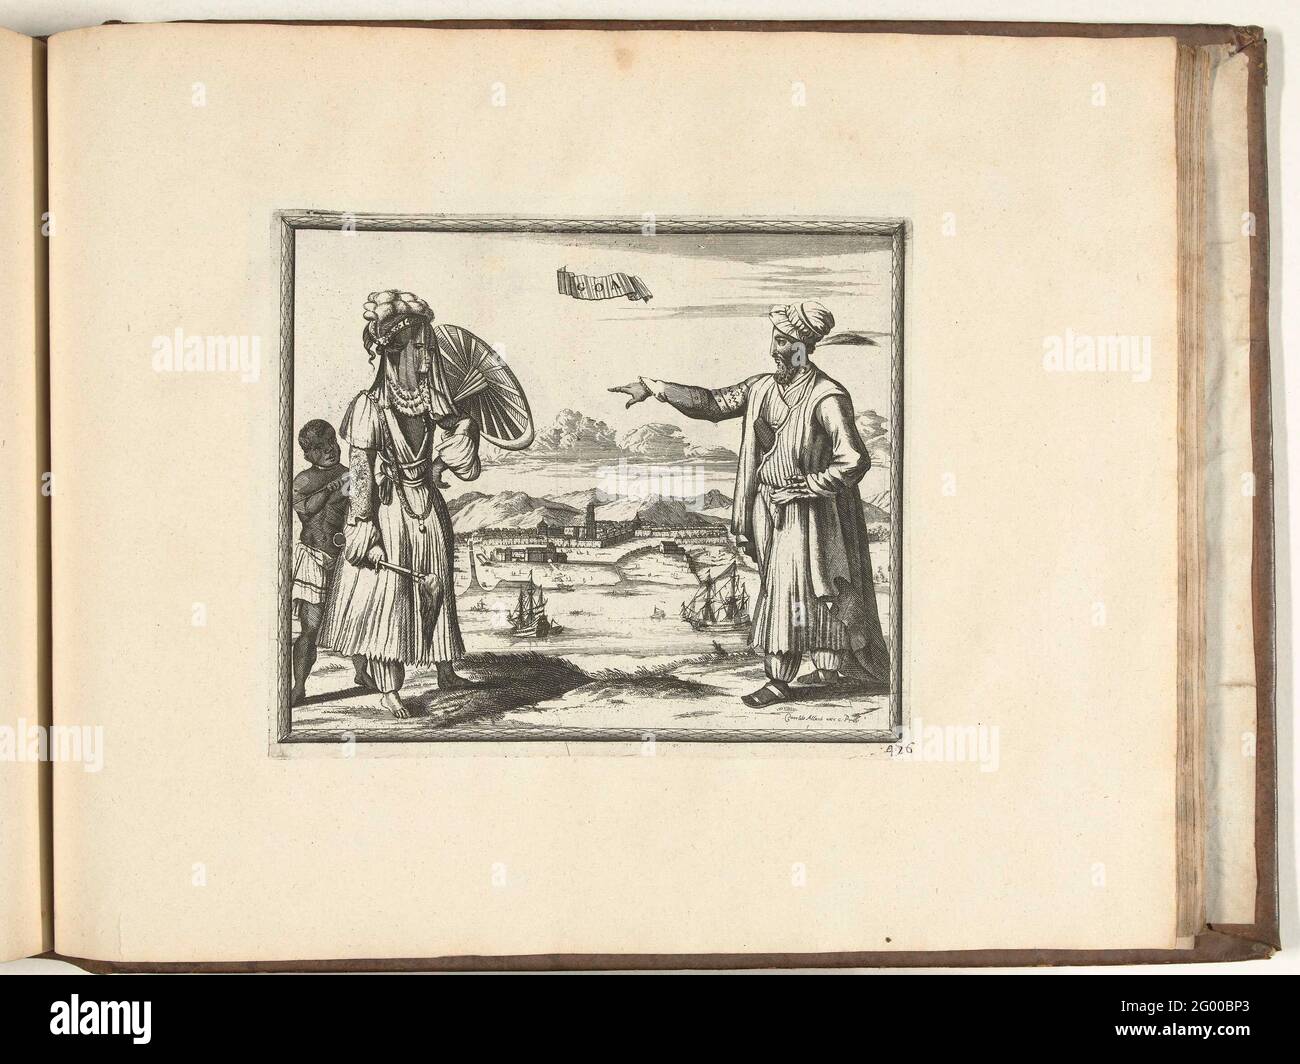 Residents of Goa, 1726; Goa; Les Forces de l'Europe, Asie, Afrique et Amerique (...) Comme Aussi Les Cartes des Côtes de France et d'Espagne. Man and wife of Goa in India dressed in local costume. In the background the city. Plate No. 476 in Part XIX of the Picture: Les Forces de l'Europe, Asia, Afrique et amic ... Comme Aussi Les Cartes des Côtes de France et d'Espagne from 1726, this second part with 271 by hand Numbered Plates of renowned strong cities and fortresses in the context of the Spanish Succession War 1701-1713. For most part, these plates have been copied to the anonymous French Stock Photo